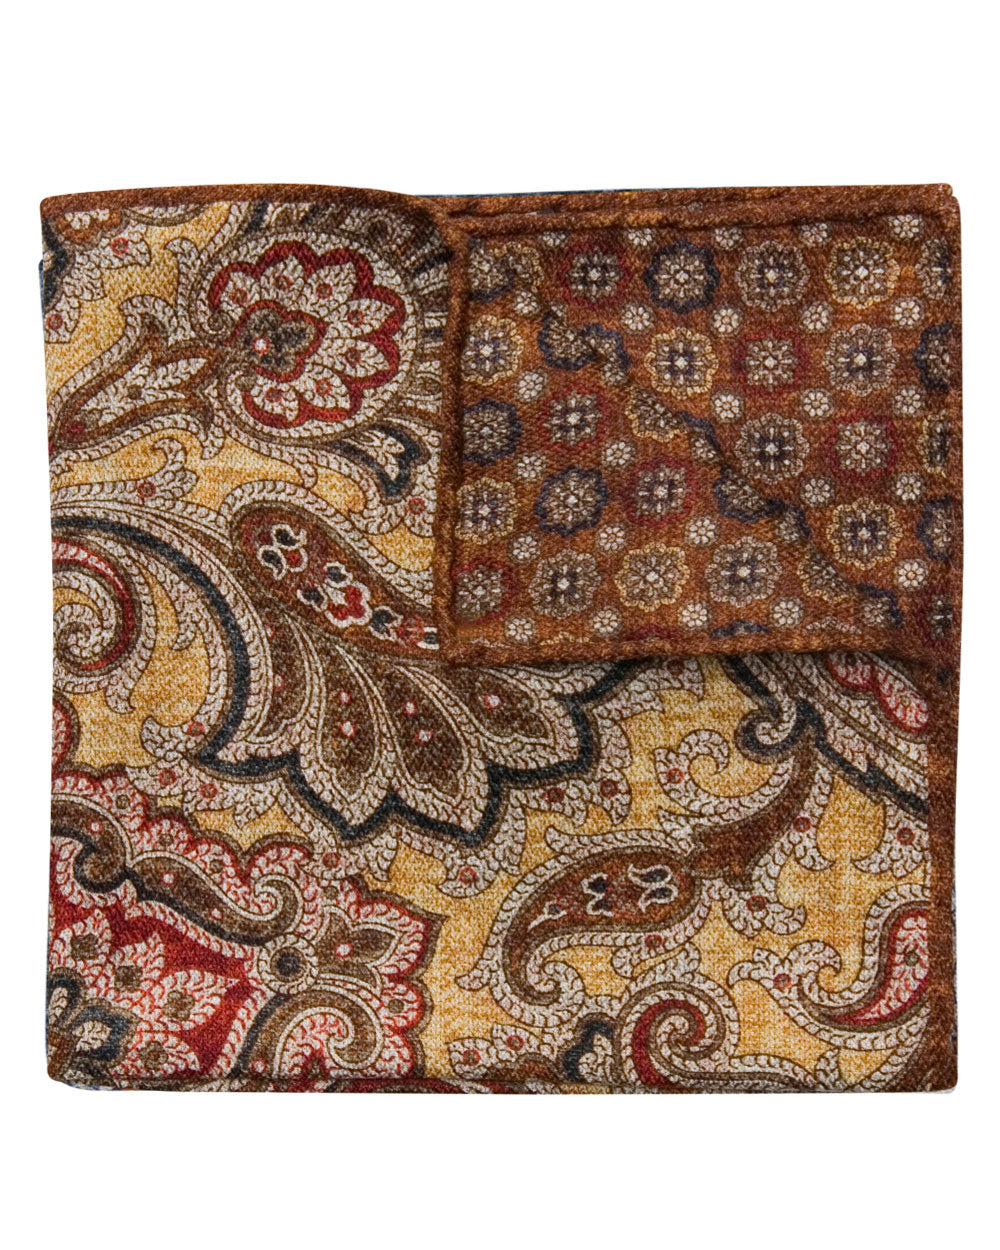 Mustard and Cinnamon Floral Paisley Pocket Square